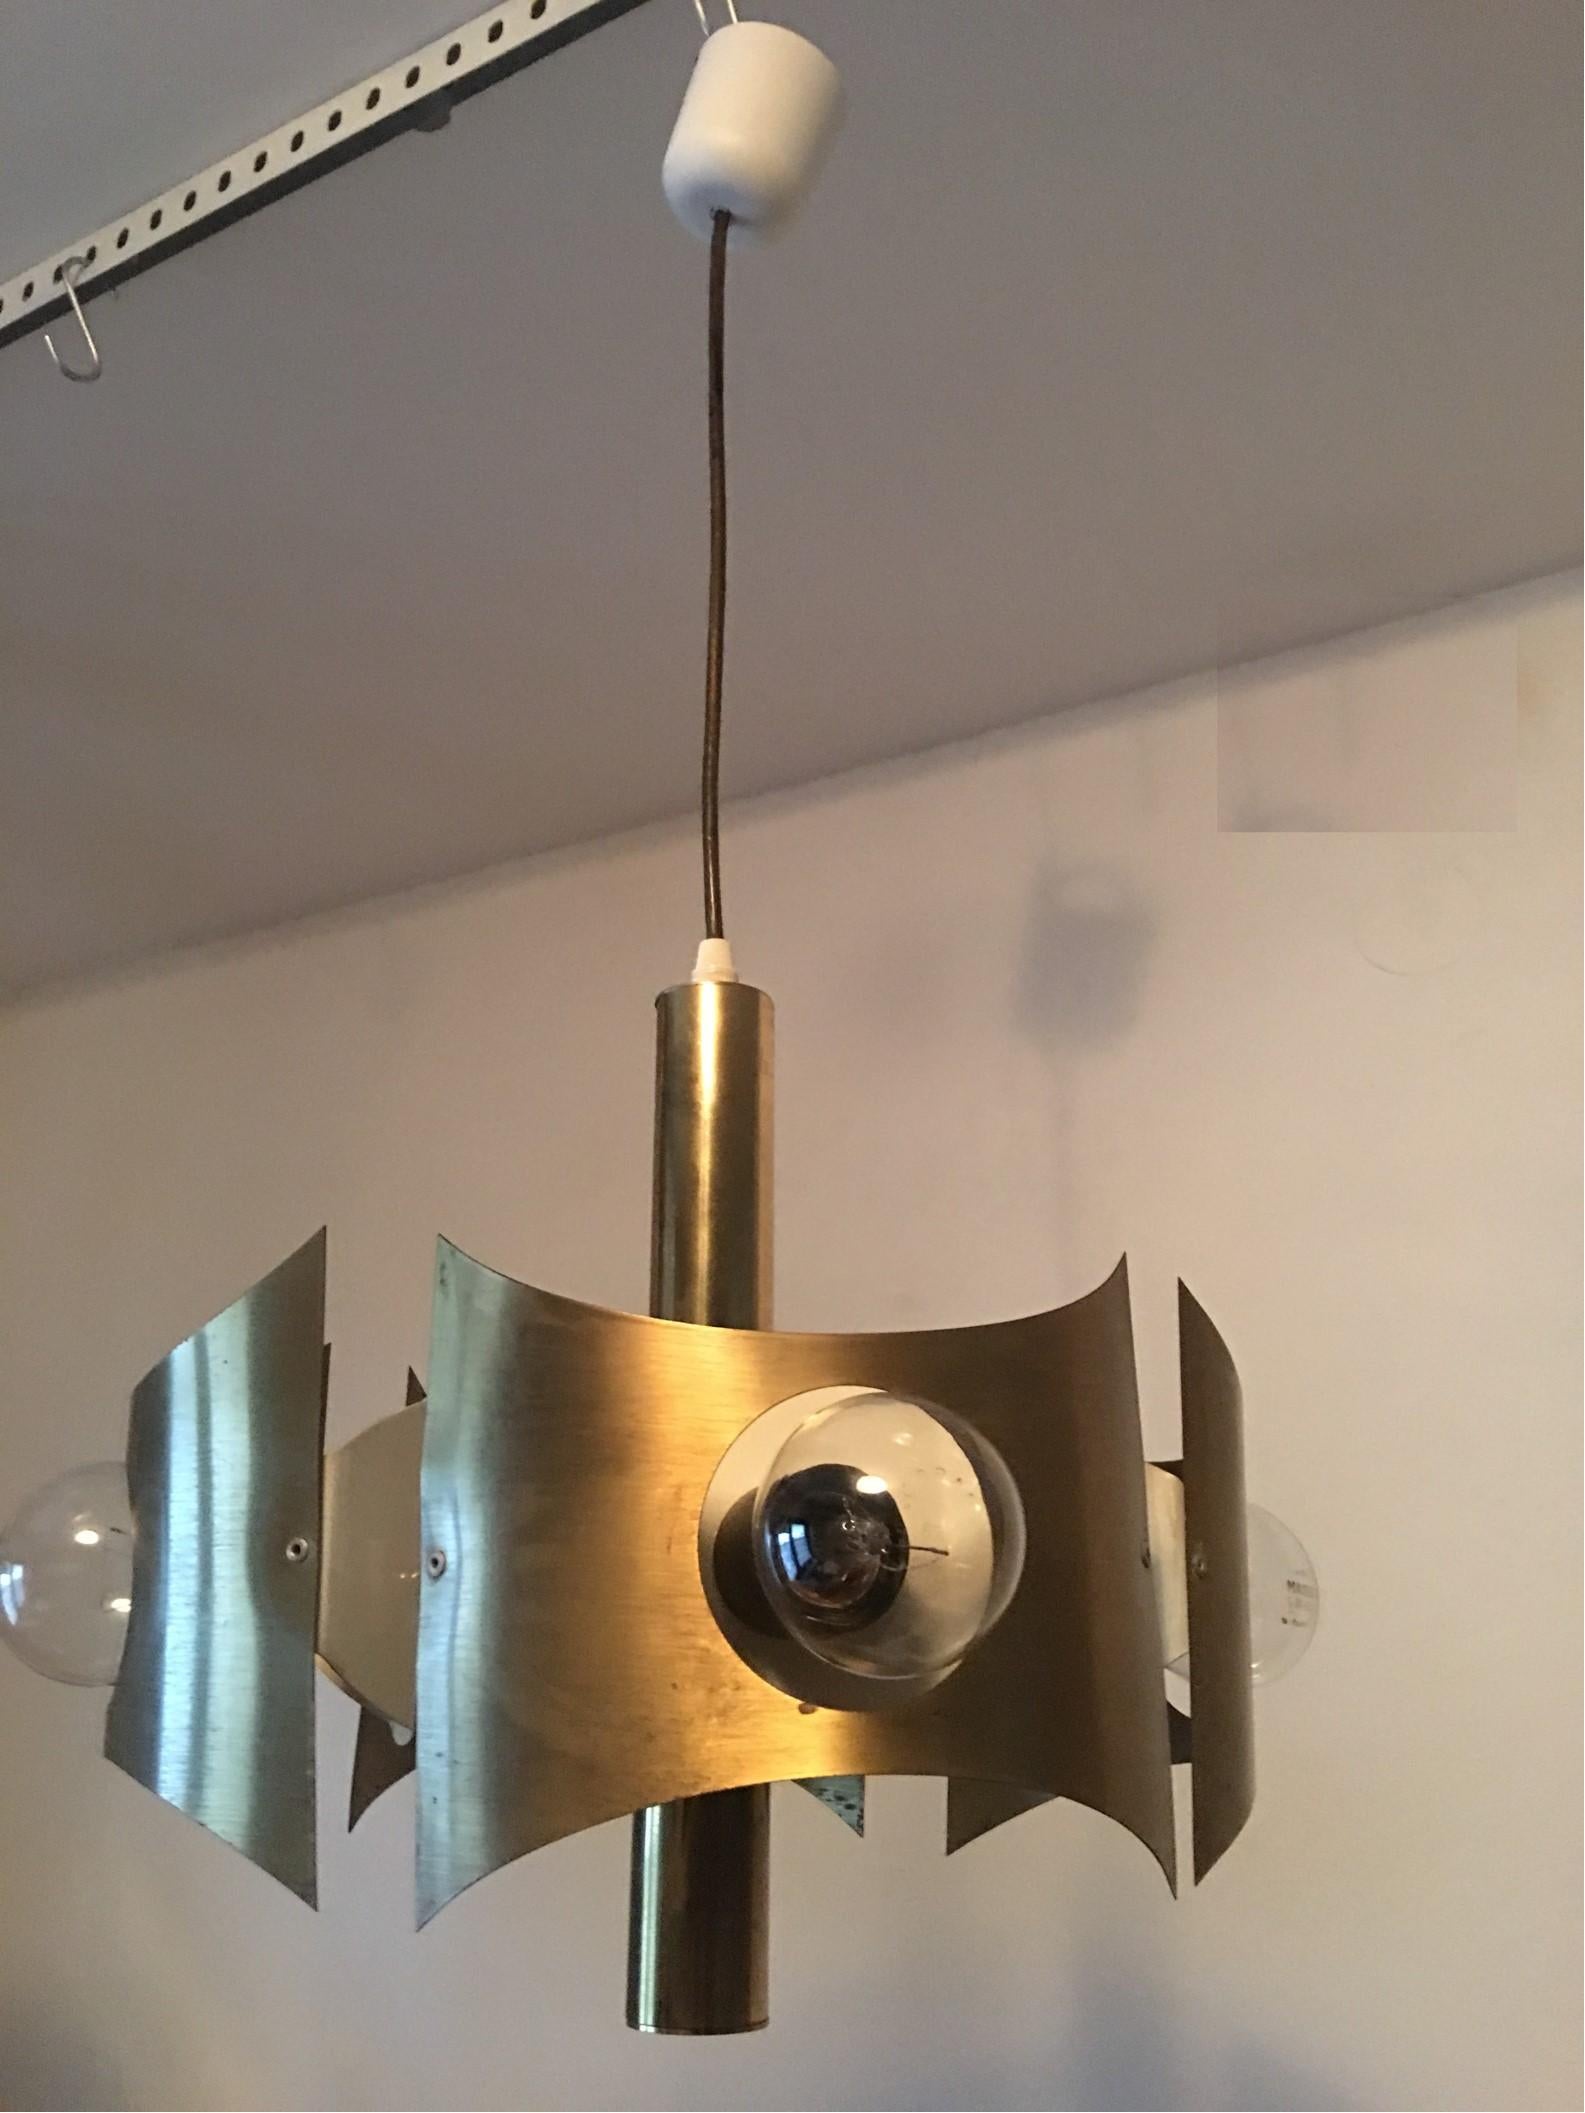 This beautiful Italian lamp has four brass compartments with a large opening in the middle for the bulb, it provides some amazing indirect lighting effects. There is some patina on the brass as expected with the age of the fixture. Clearly shown on